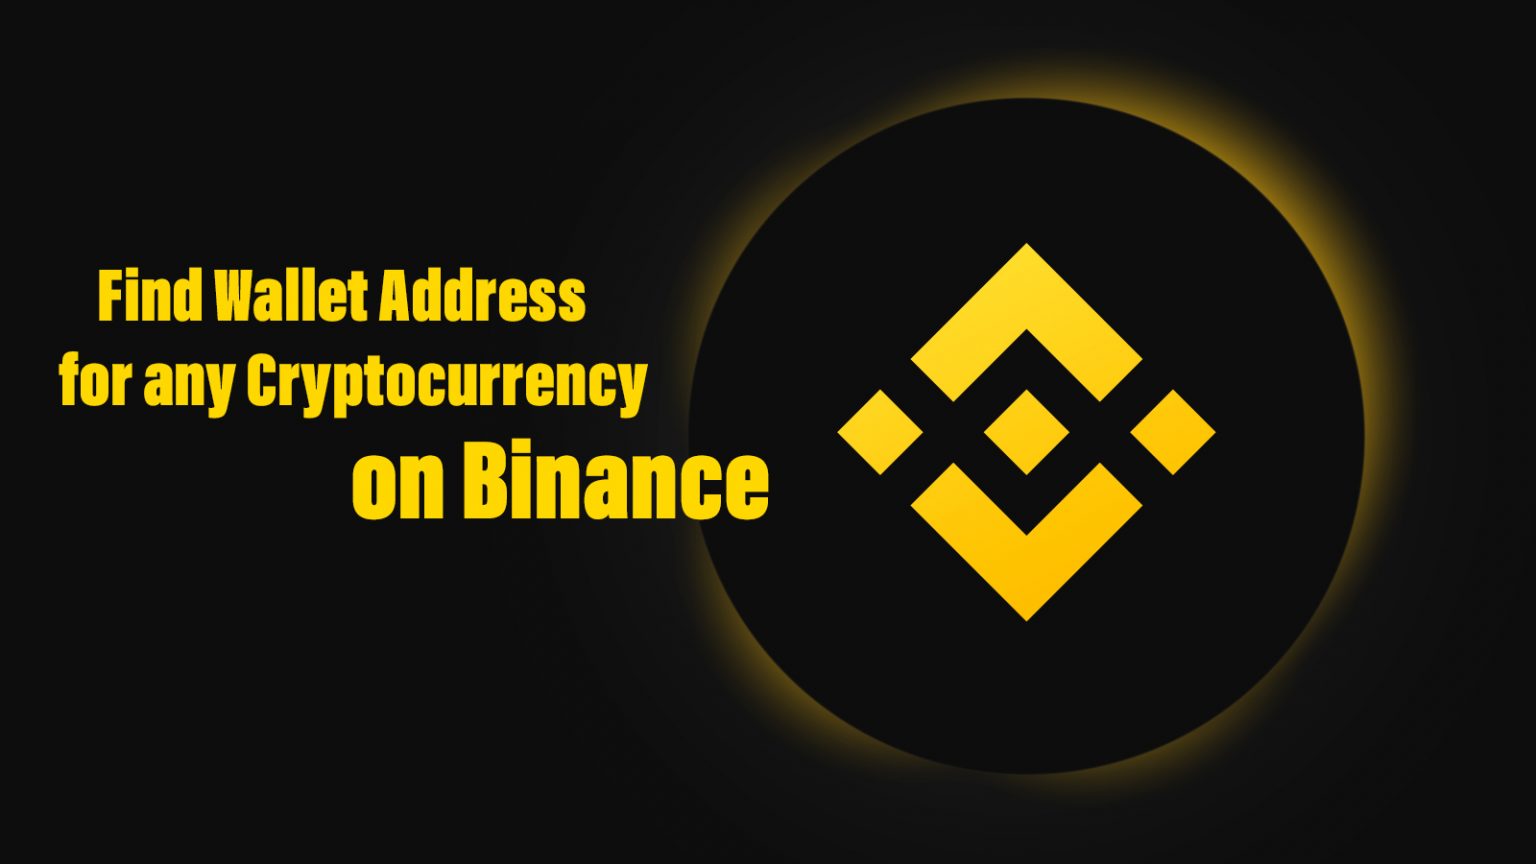 How to Find Wallet Address for any Cryptocurrency on Binance